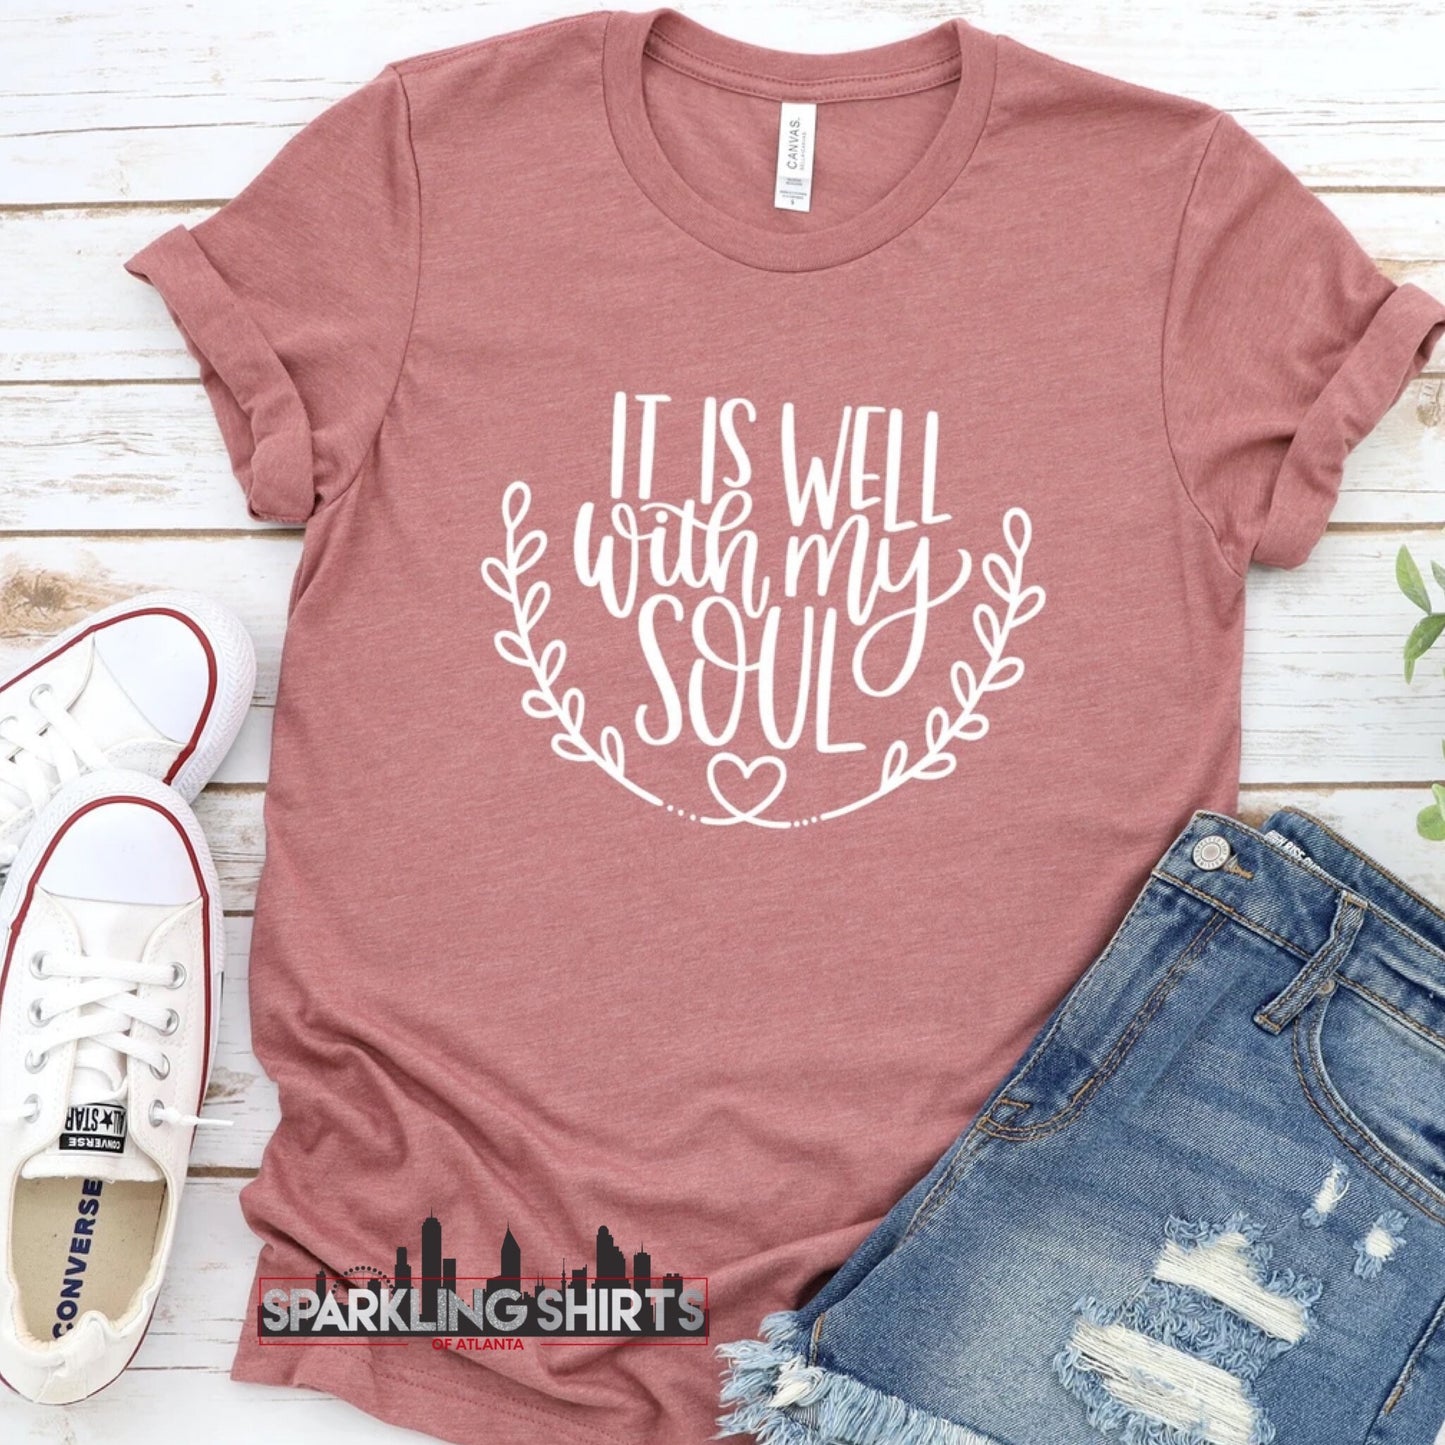 It Is Well With My Soul| Peace| Meditation| Spiritual| Everyday| Graphic T-shirt